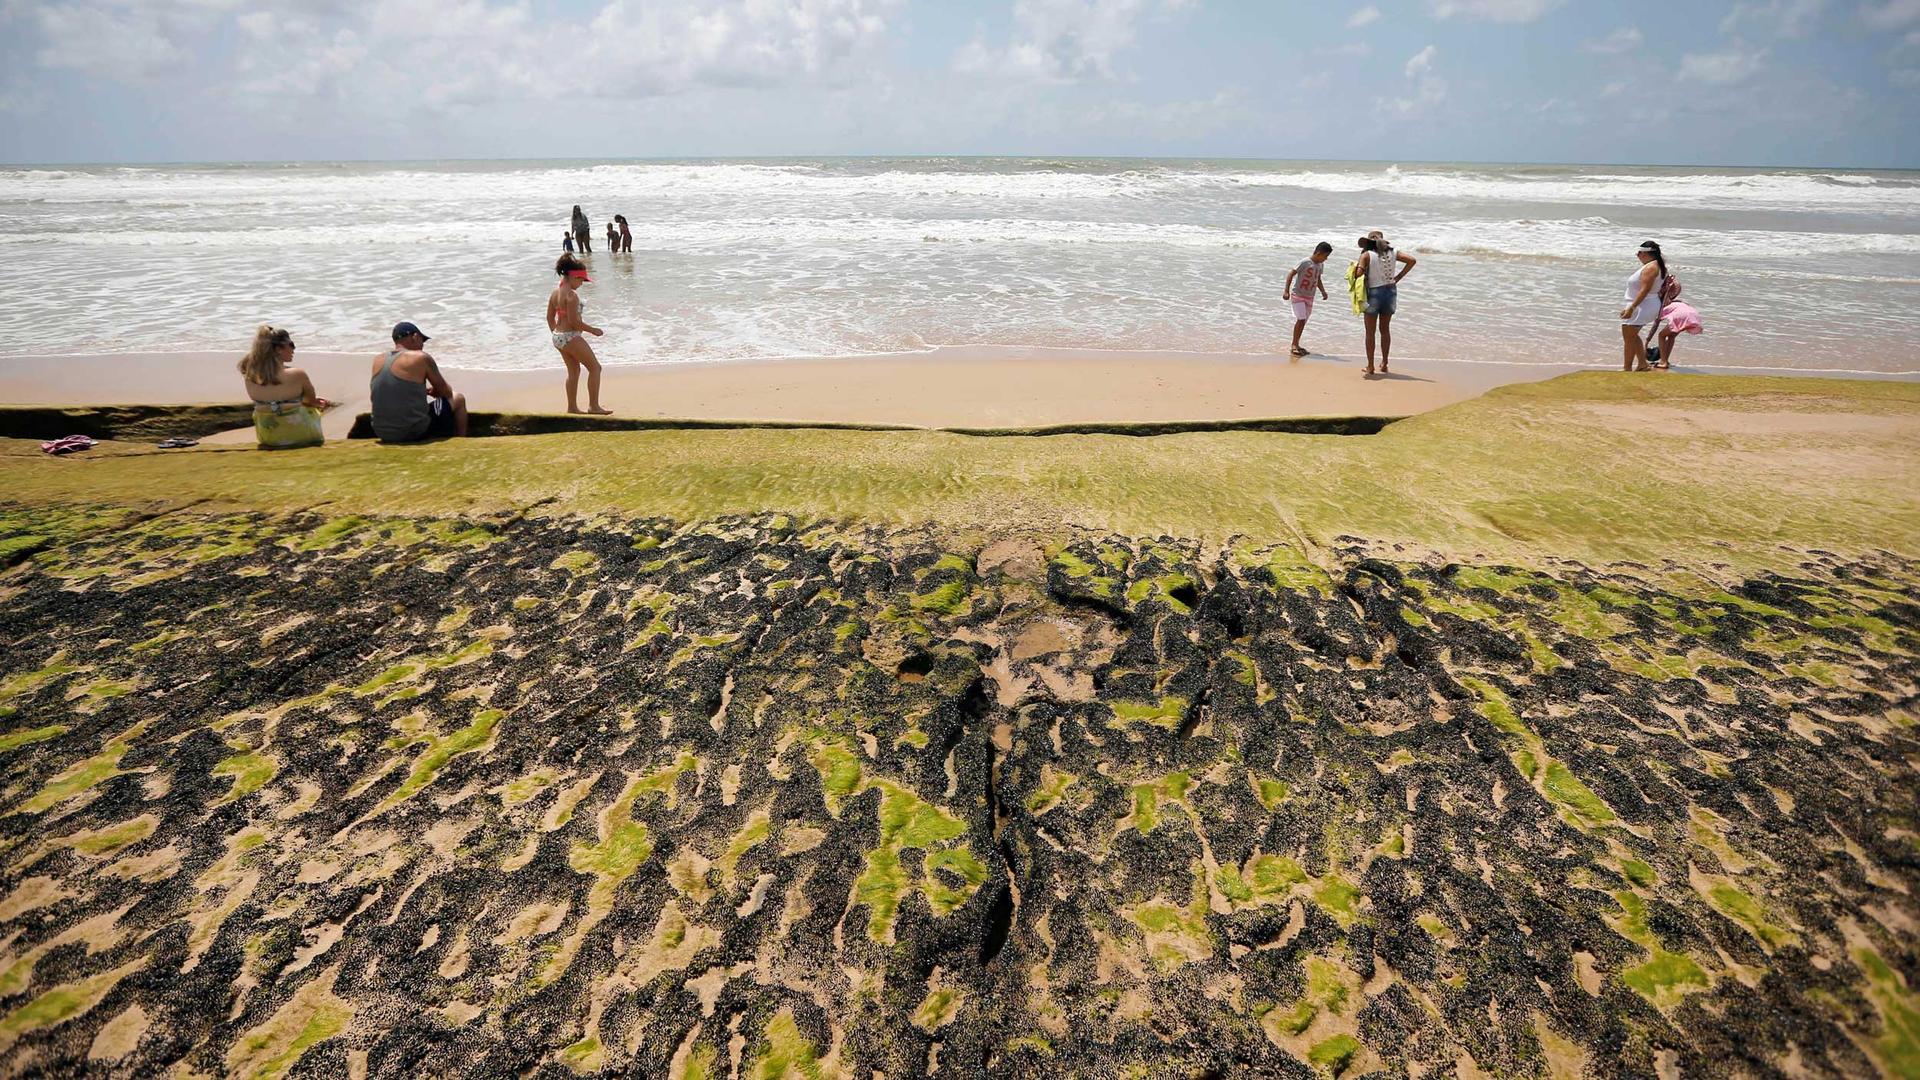 Beach goers sit on the sand and walk in the ocean, but in the foreground, dark spots of oil can be seen.